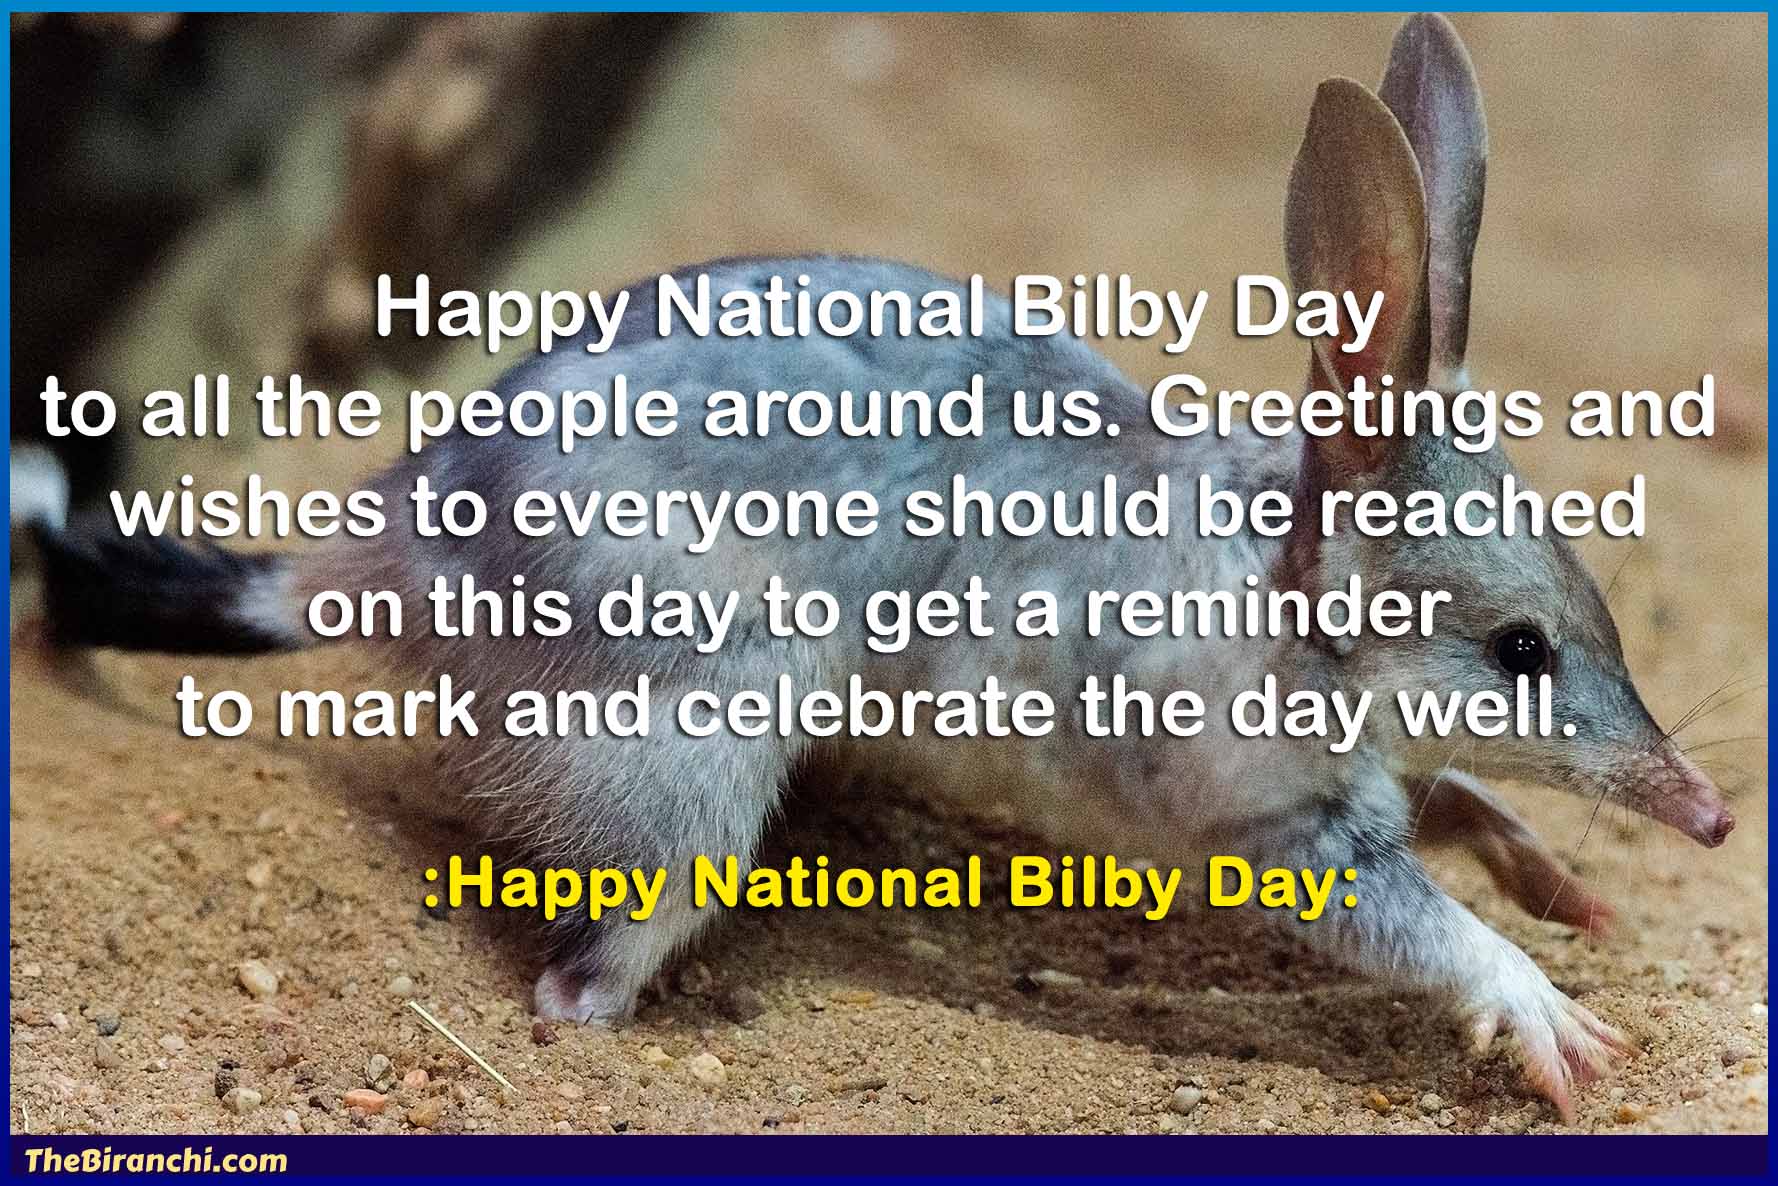 Happy-National-Bilby-Day-Greetings-and-Wishes